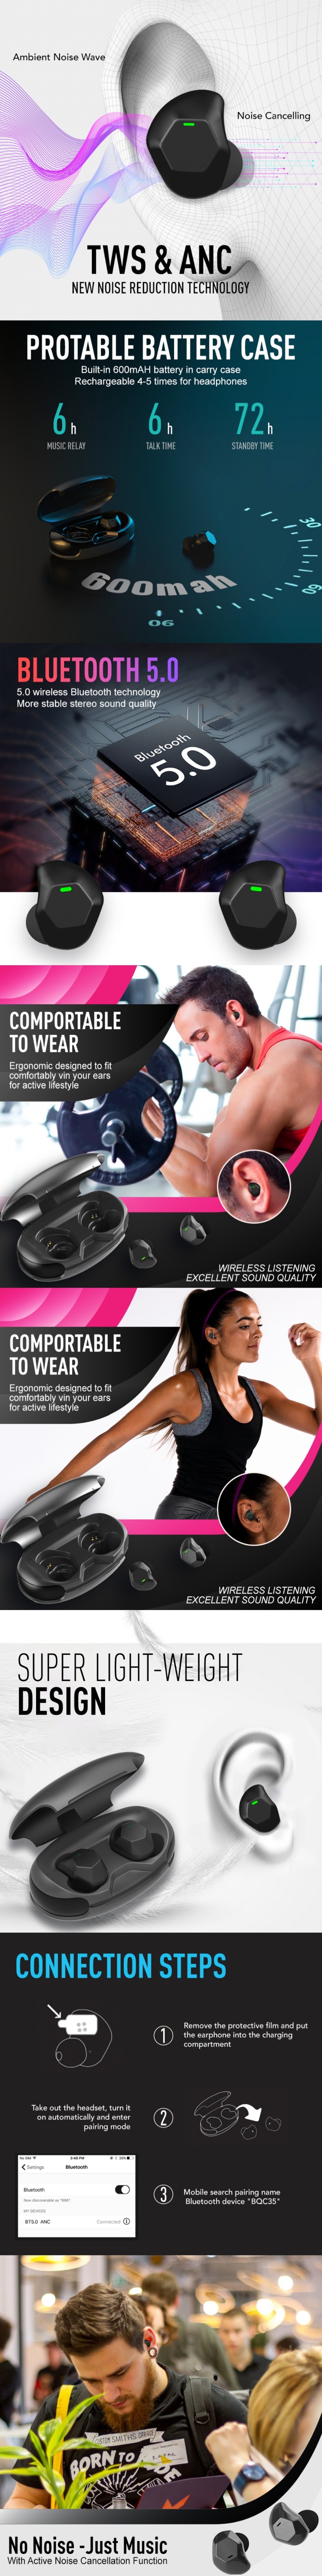 Noise Cancellation TWS Earbuds, Noise Reduction TWS Earbuds, Active ANC Wireless Earphone, BQC35 ANC TWS Earbuds, ANC TWS Earbuds Manufacturer, ANC Bluetooth Headset, ANC Bluetooth Earphone, ANC Wireless Headset,